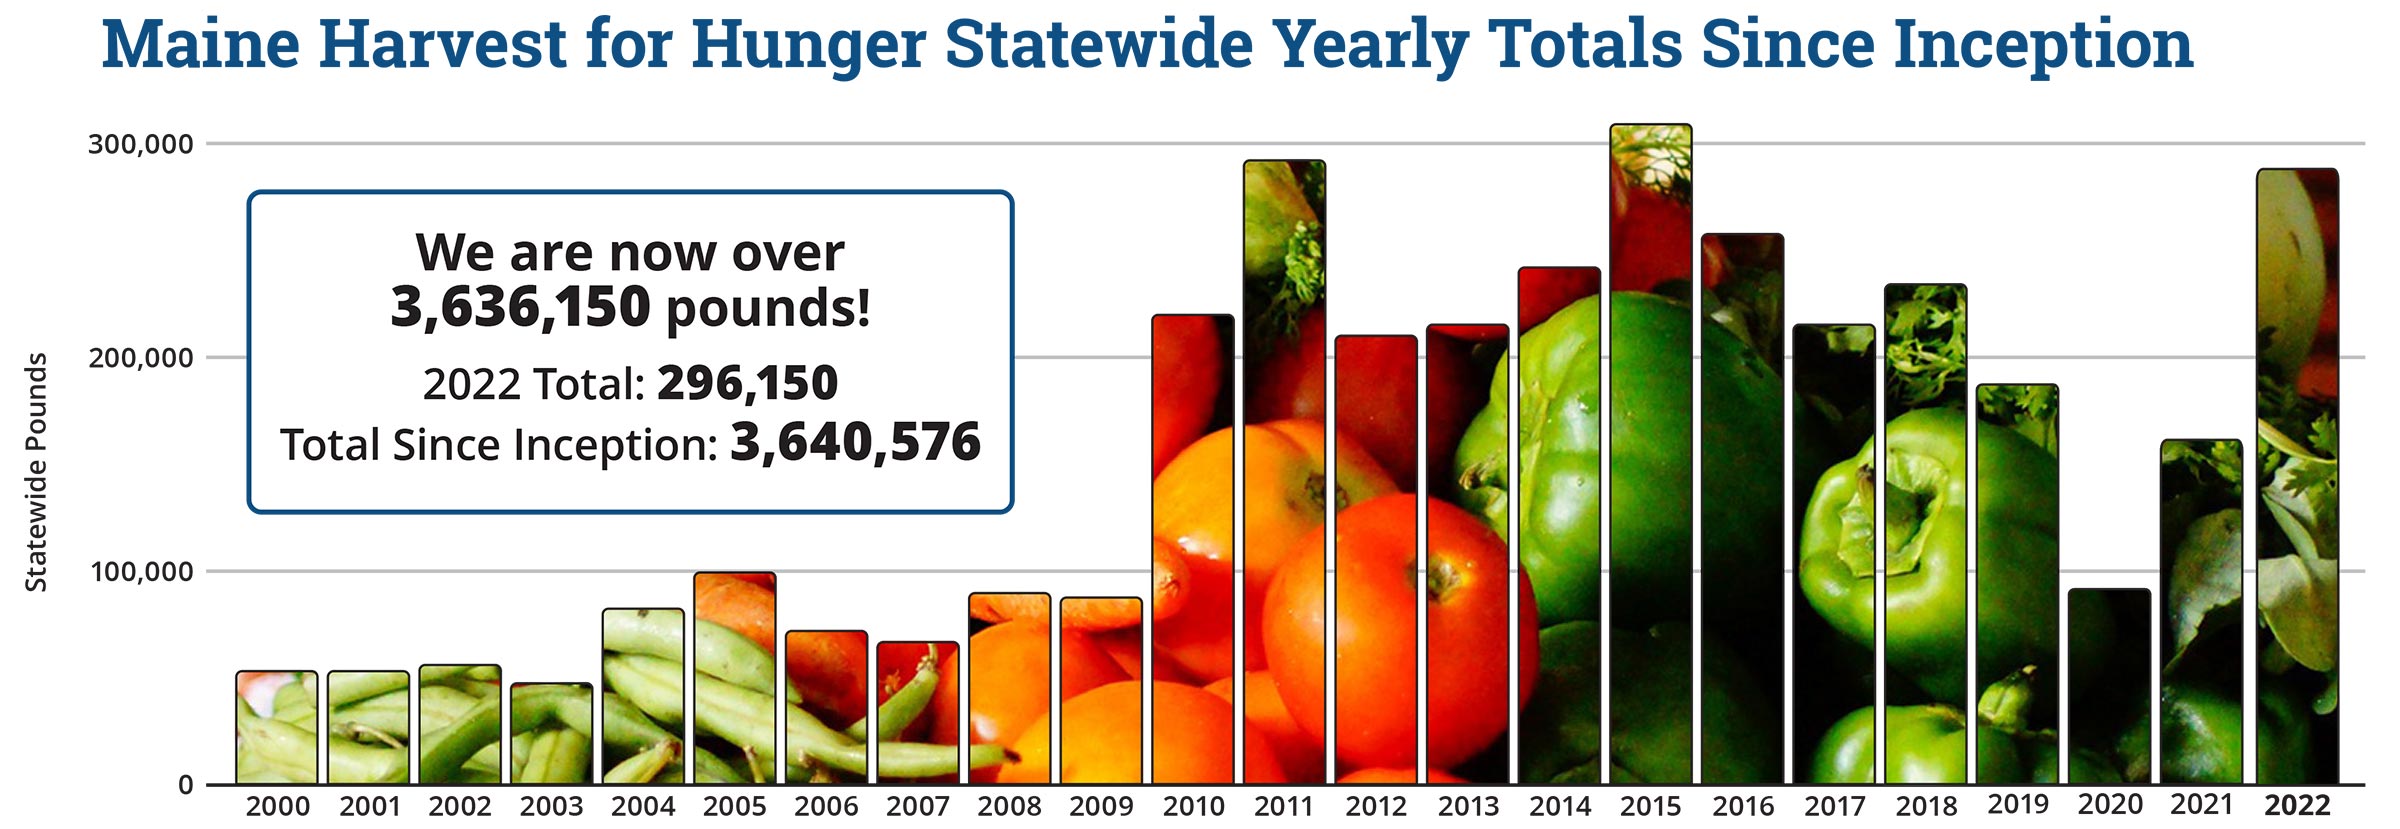 Graph showing statewide donations in pounds from the year 2000 through 2022, titled “Maine Harvest for Hunger Statewide Yearly Totals Since Inception.” Text within infographic reads “We are now over 3,636,150 pounds!, 2022 Total: 296,150, Total Since Inception: 3,640,576.” Follow the link below, “View the Totals,” for year-by-year totals.